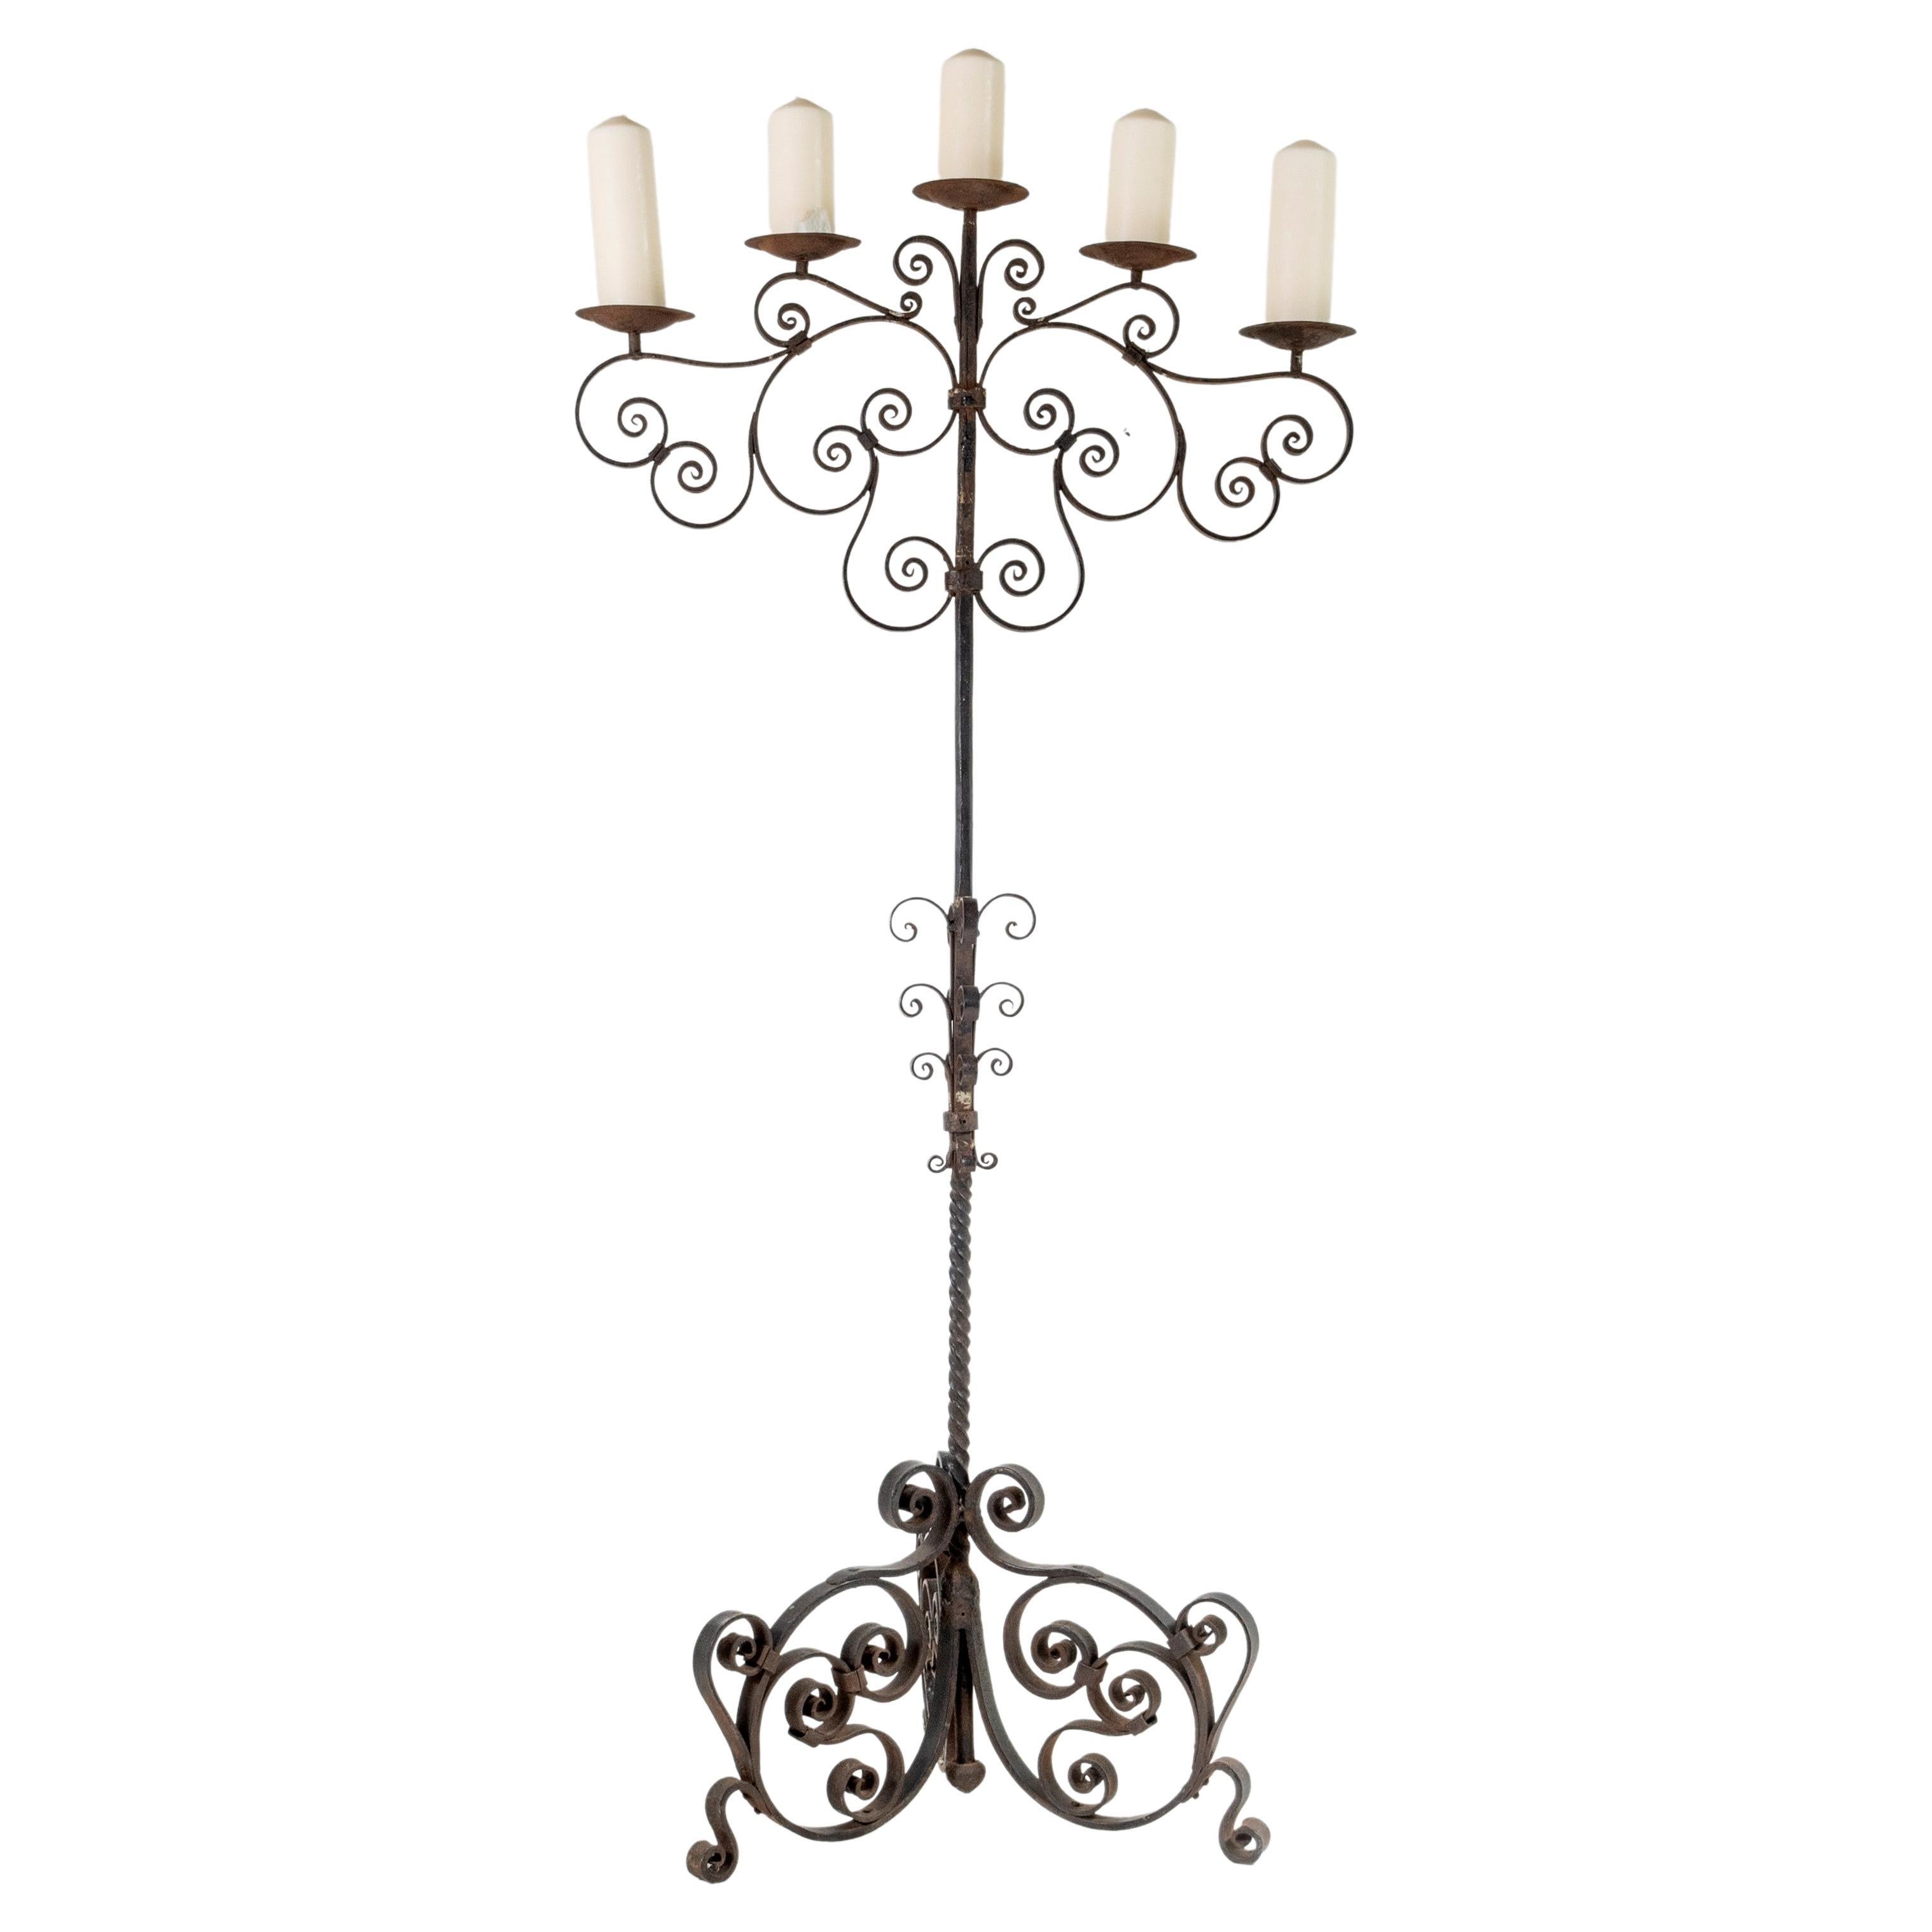 English Castle Candelabra Large Scale Heavy Wrought Iron Pricket Candle Tree